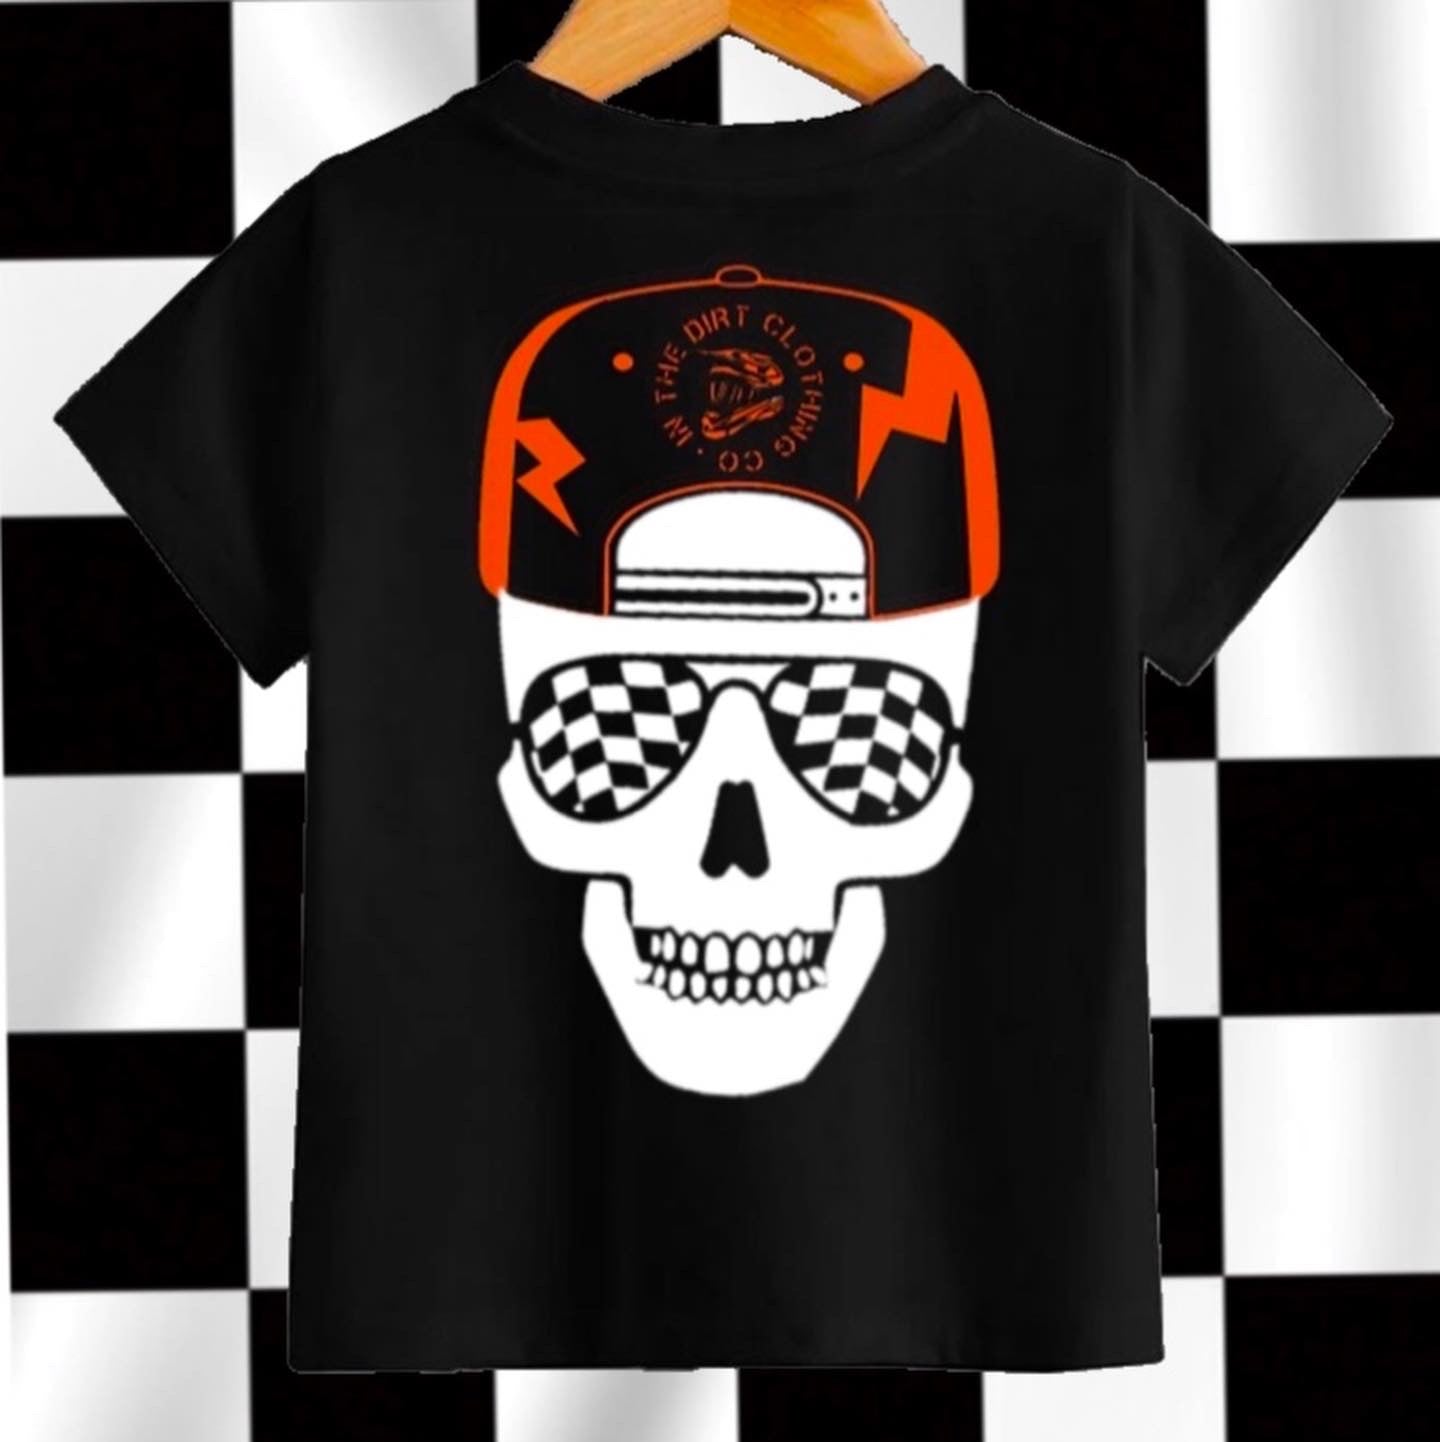 SnapBack Sid Tee. Use the comments box to choose a colour not listed below!